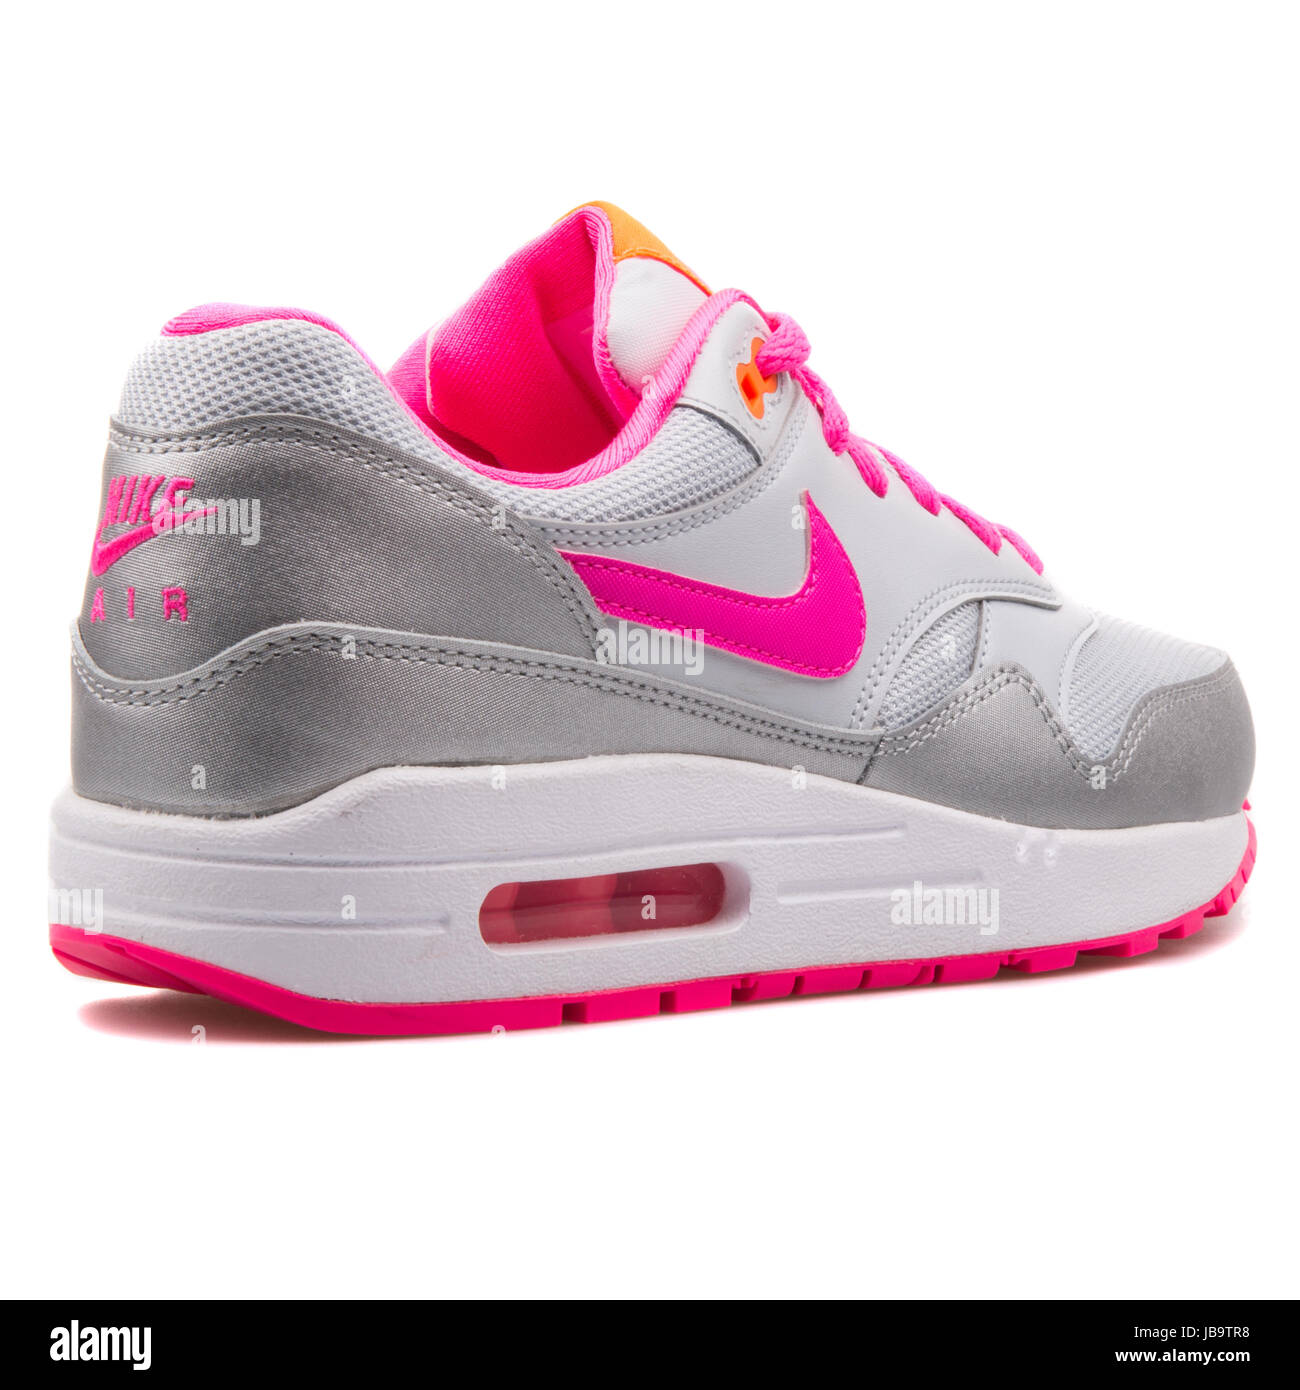 Nike Air Max 1 (GS) Argent et Rose's Sports Jeunes Sneakers - 653653-005  Photo Stock - Alamy